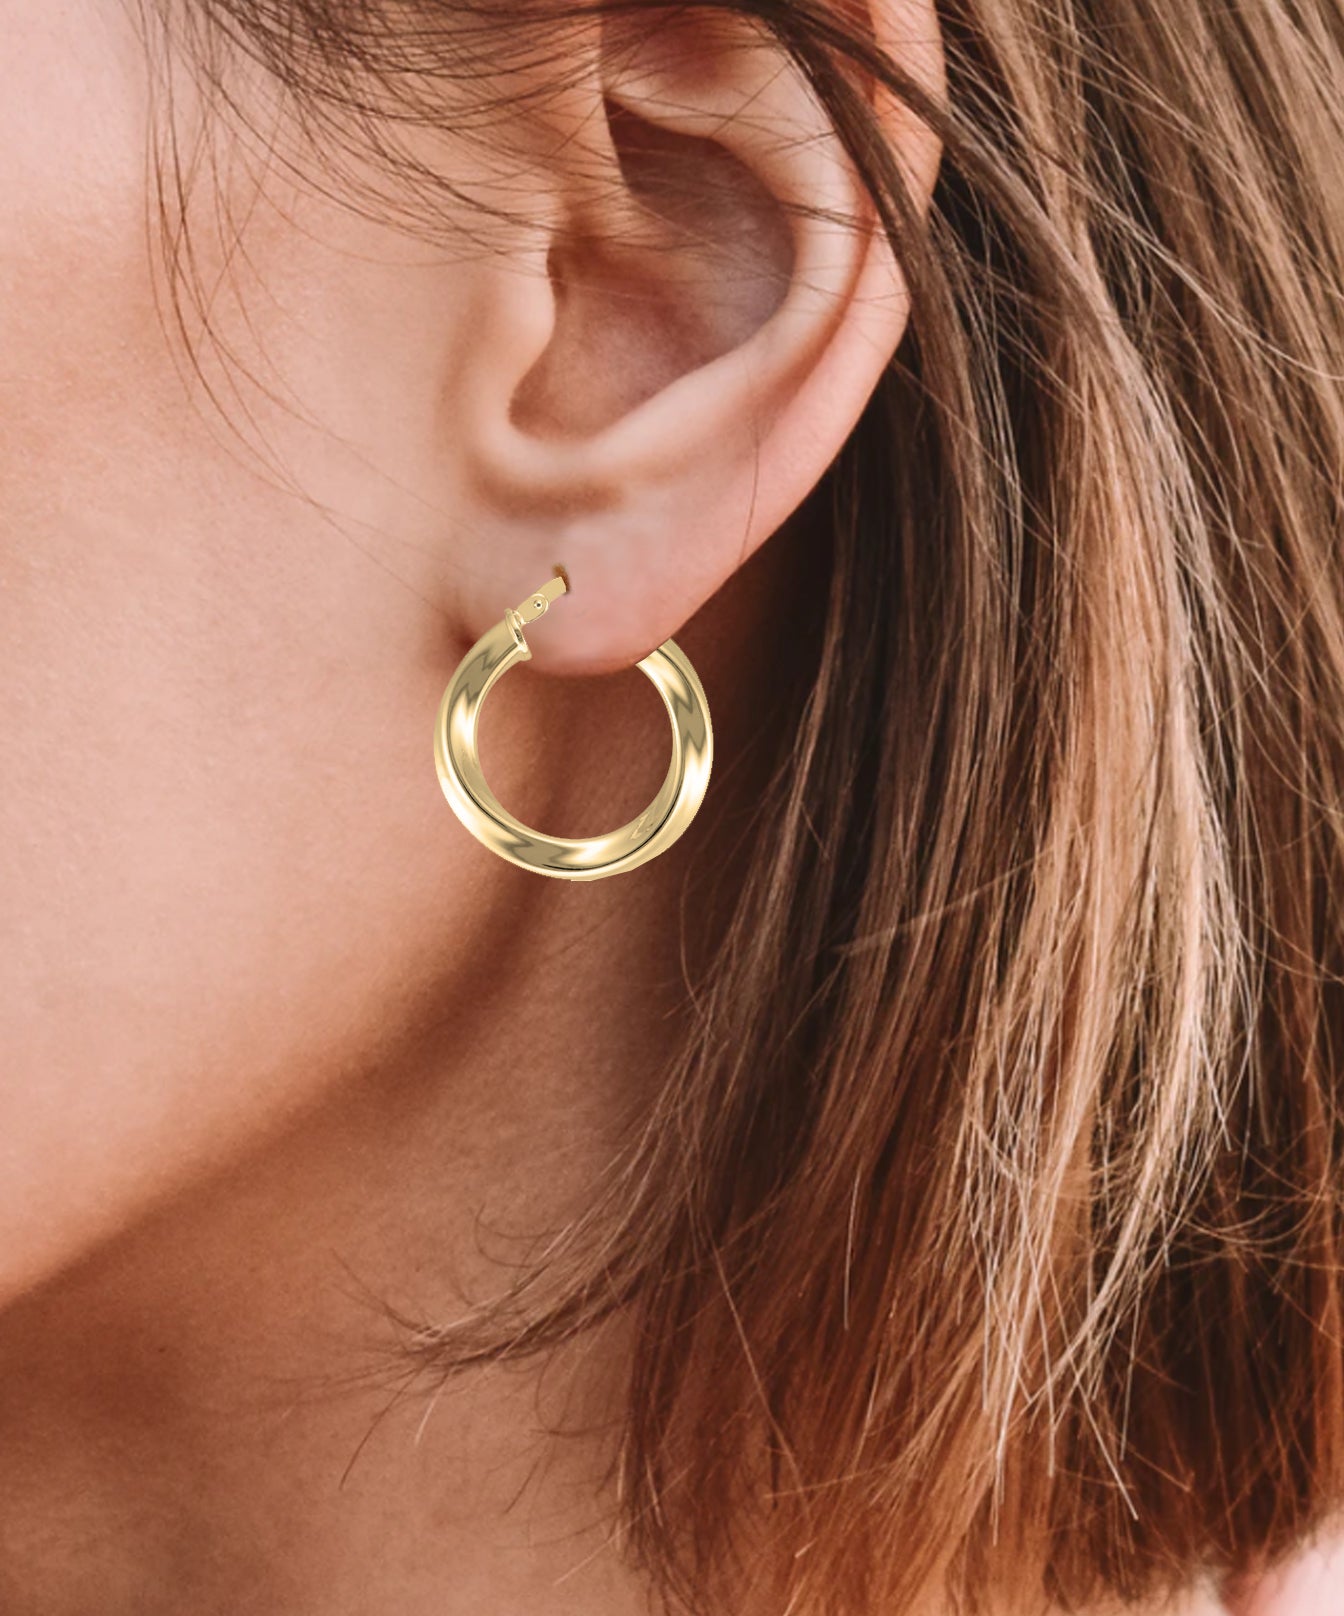 Yellow Gold Twisted Round Polished Hoop Earrings